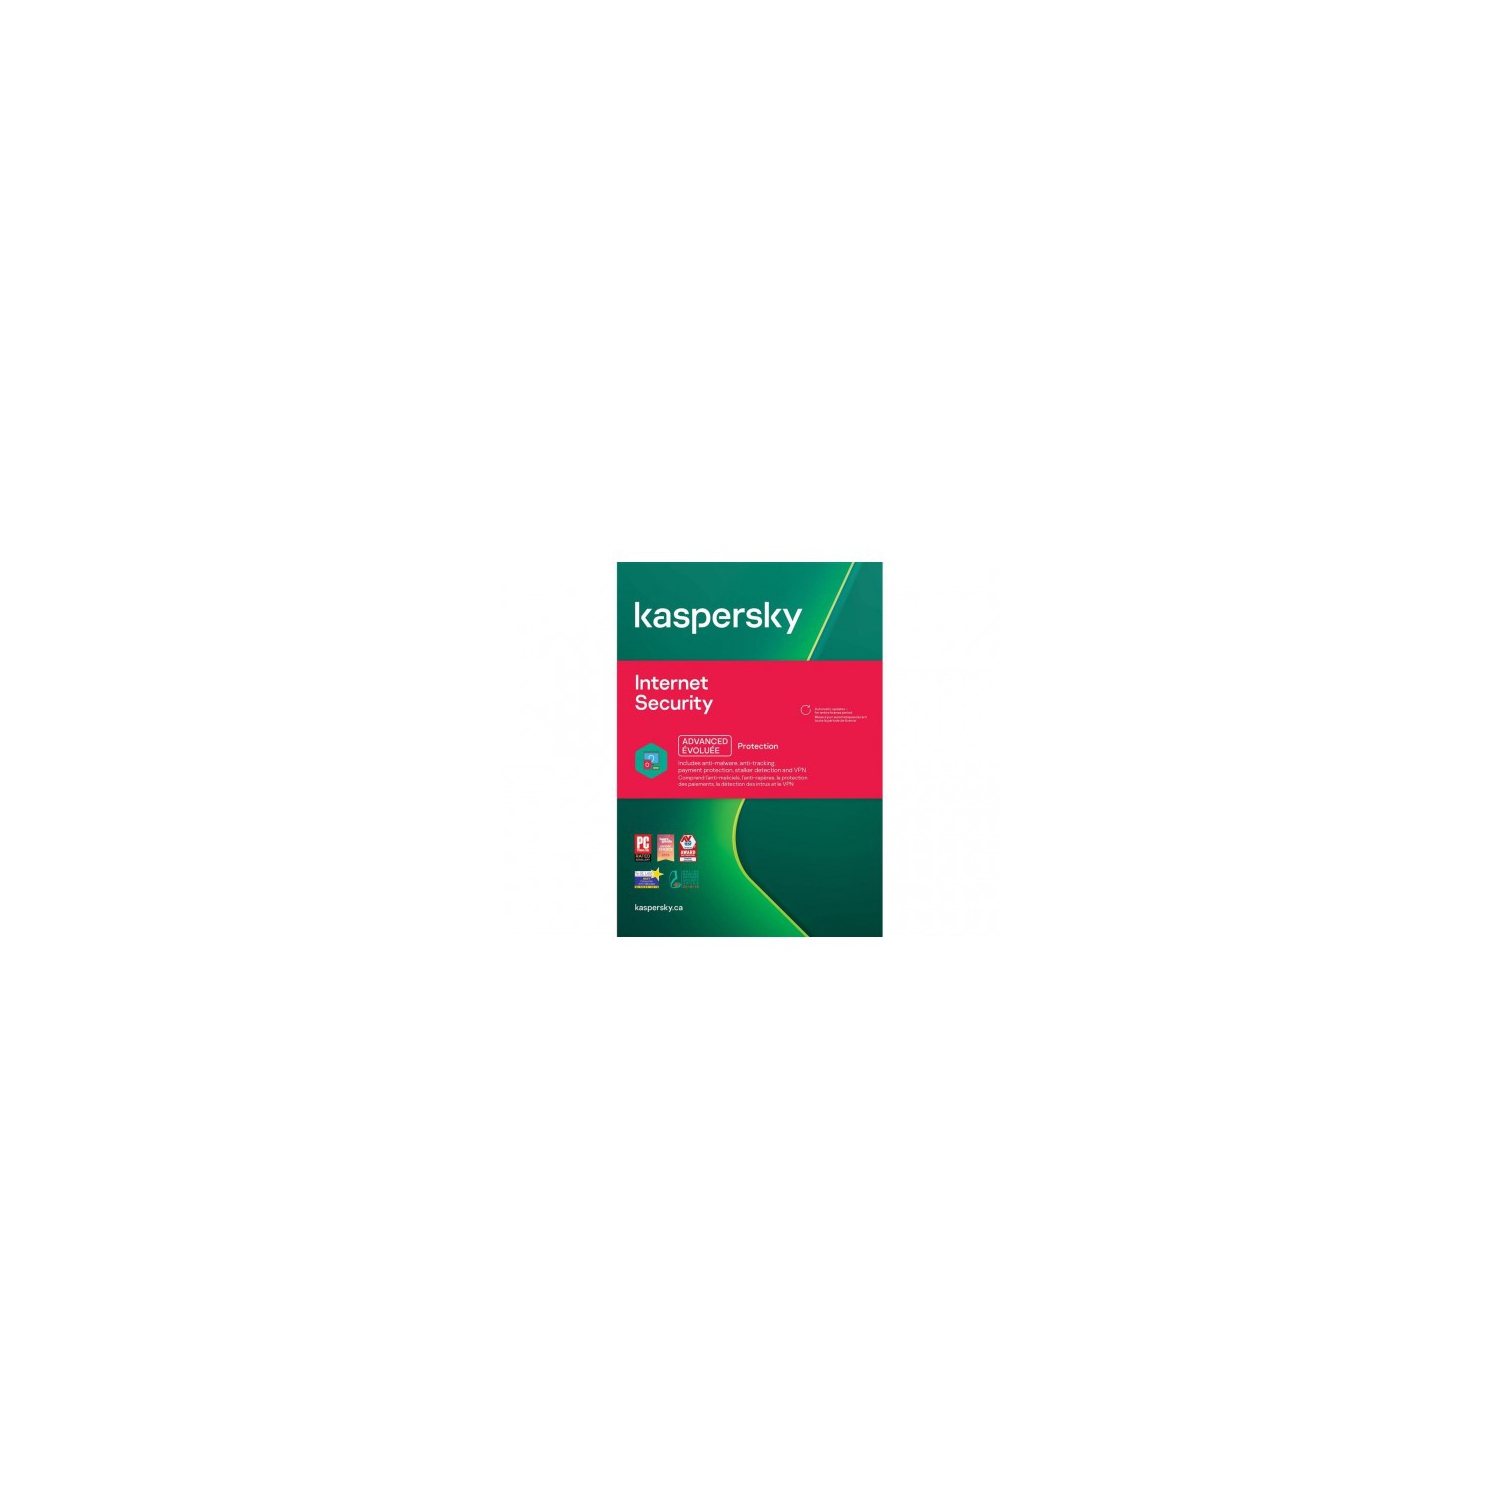 Kaspersky (PKC) Internet Security 1-User, 1-Year License, Product Key, (KEY CARD ONLY)(FREE SHIPPING)